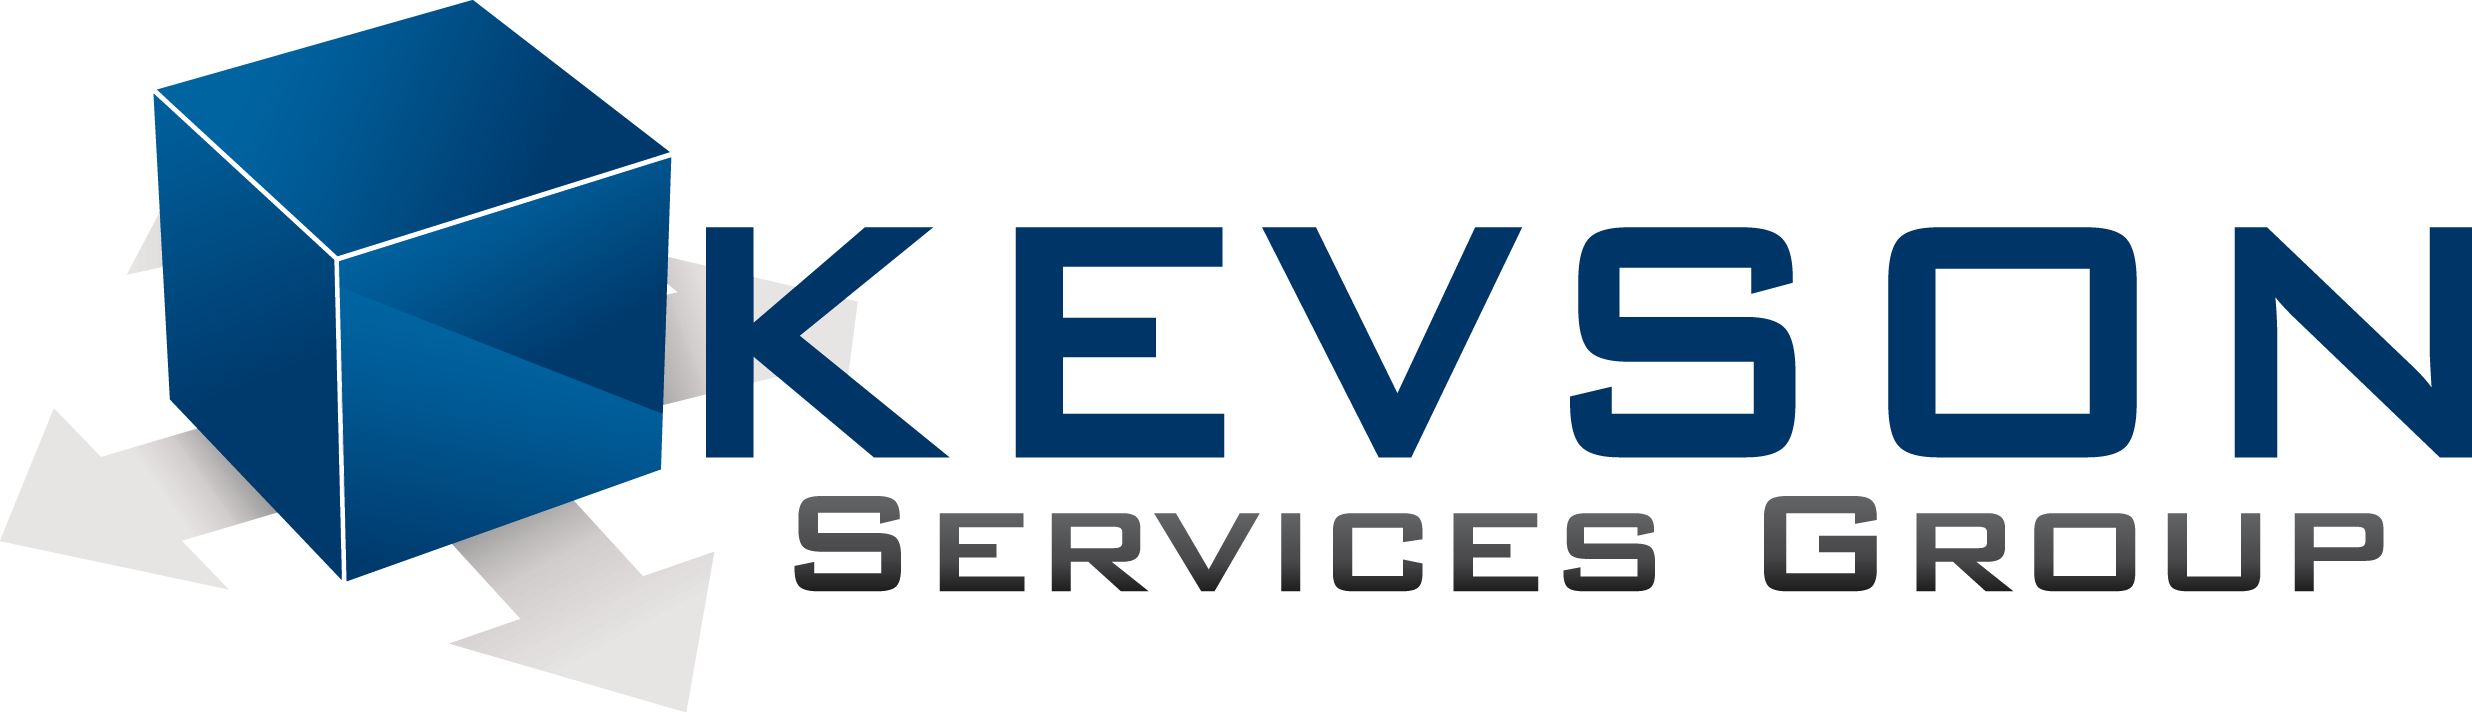 Kevson Services Group, Inc.